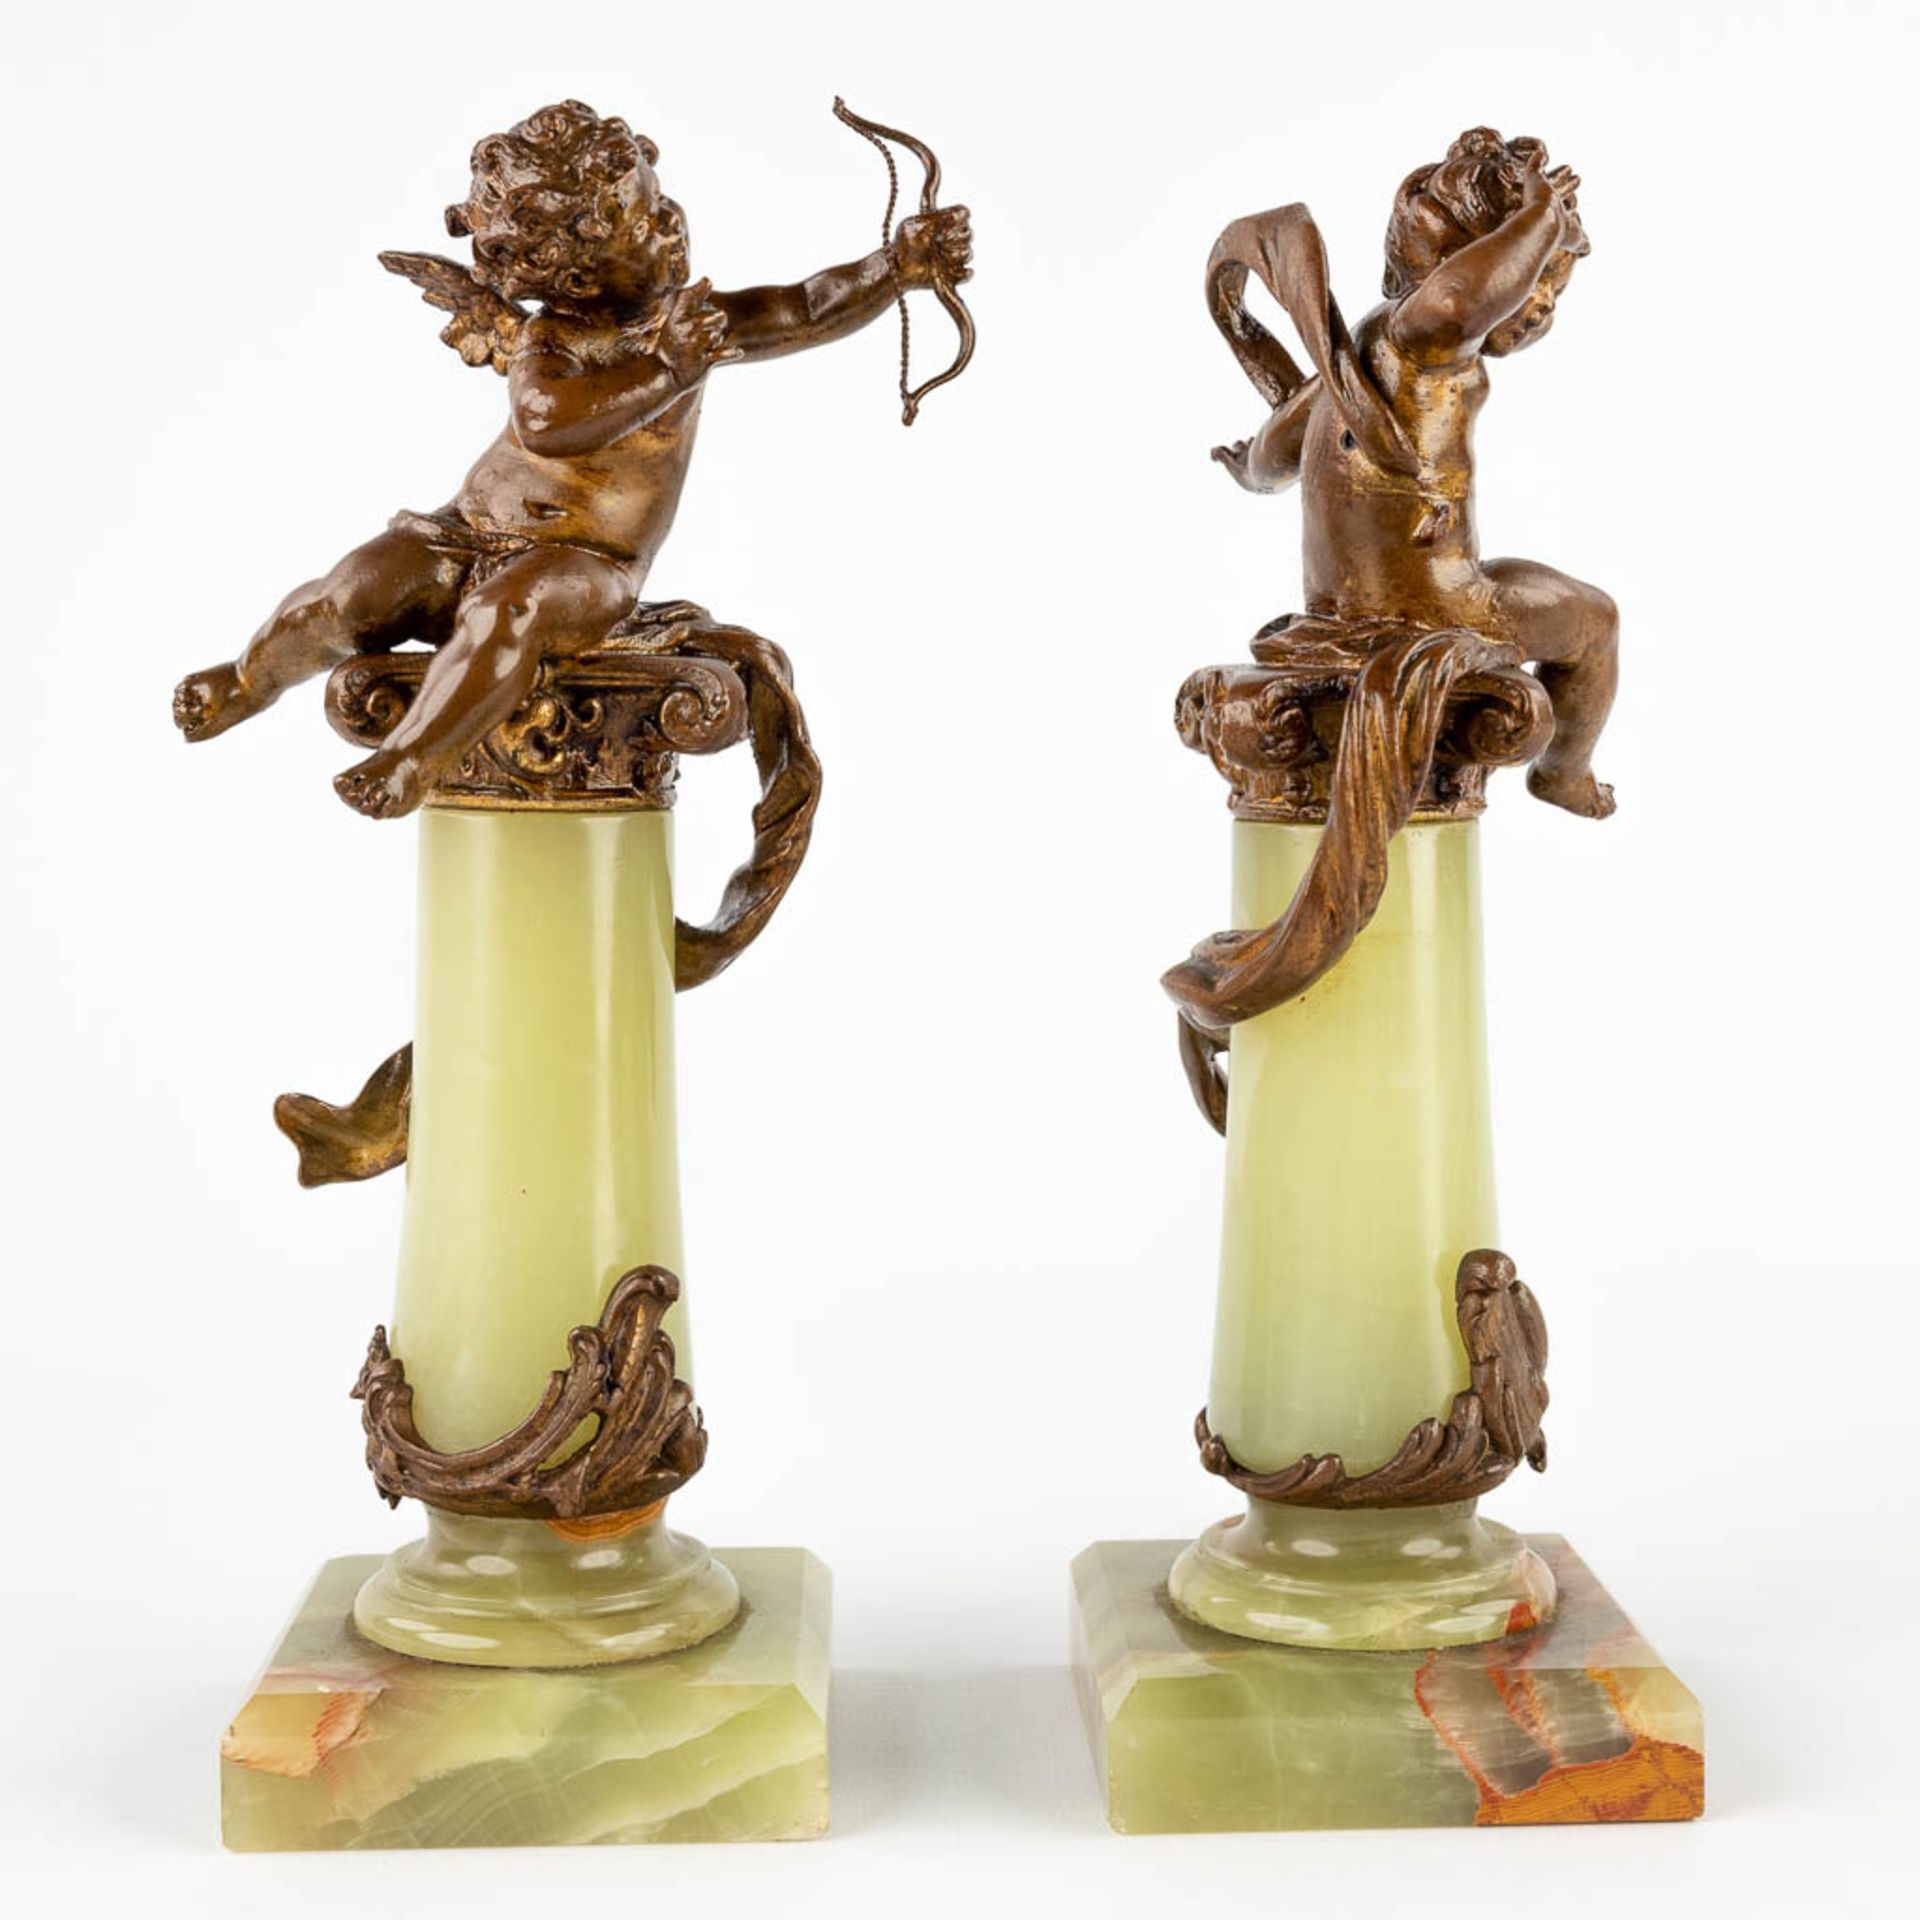 A pair of putti on a pedestal, spelter and onyx in Louis XV style. 19th C. (D:8 x W:8 x H:23 cm) - Image 3 of 11